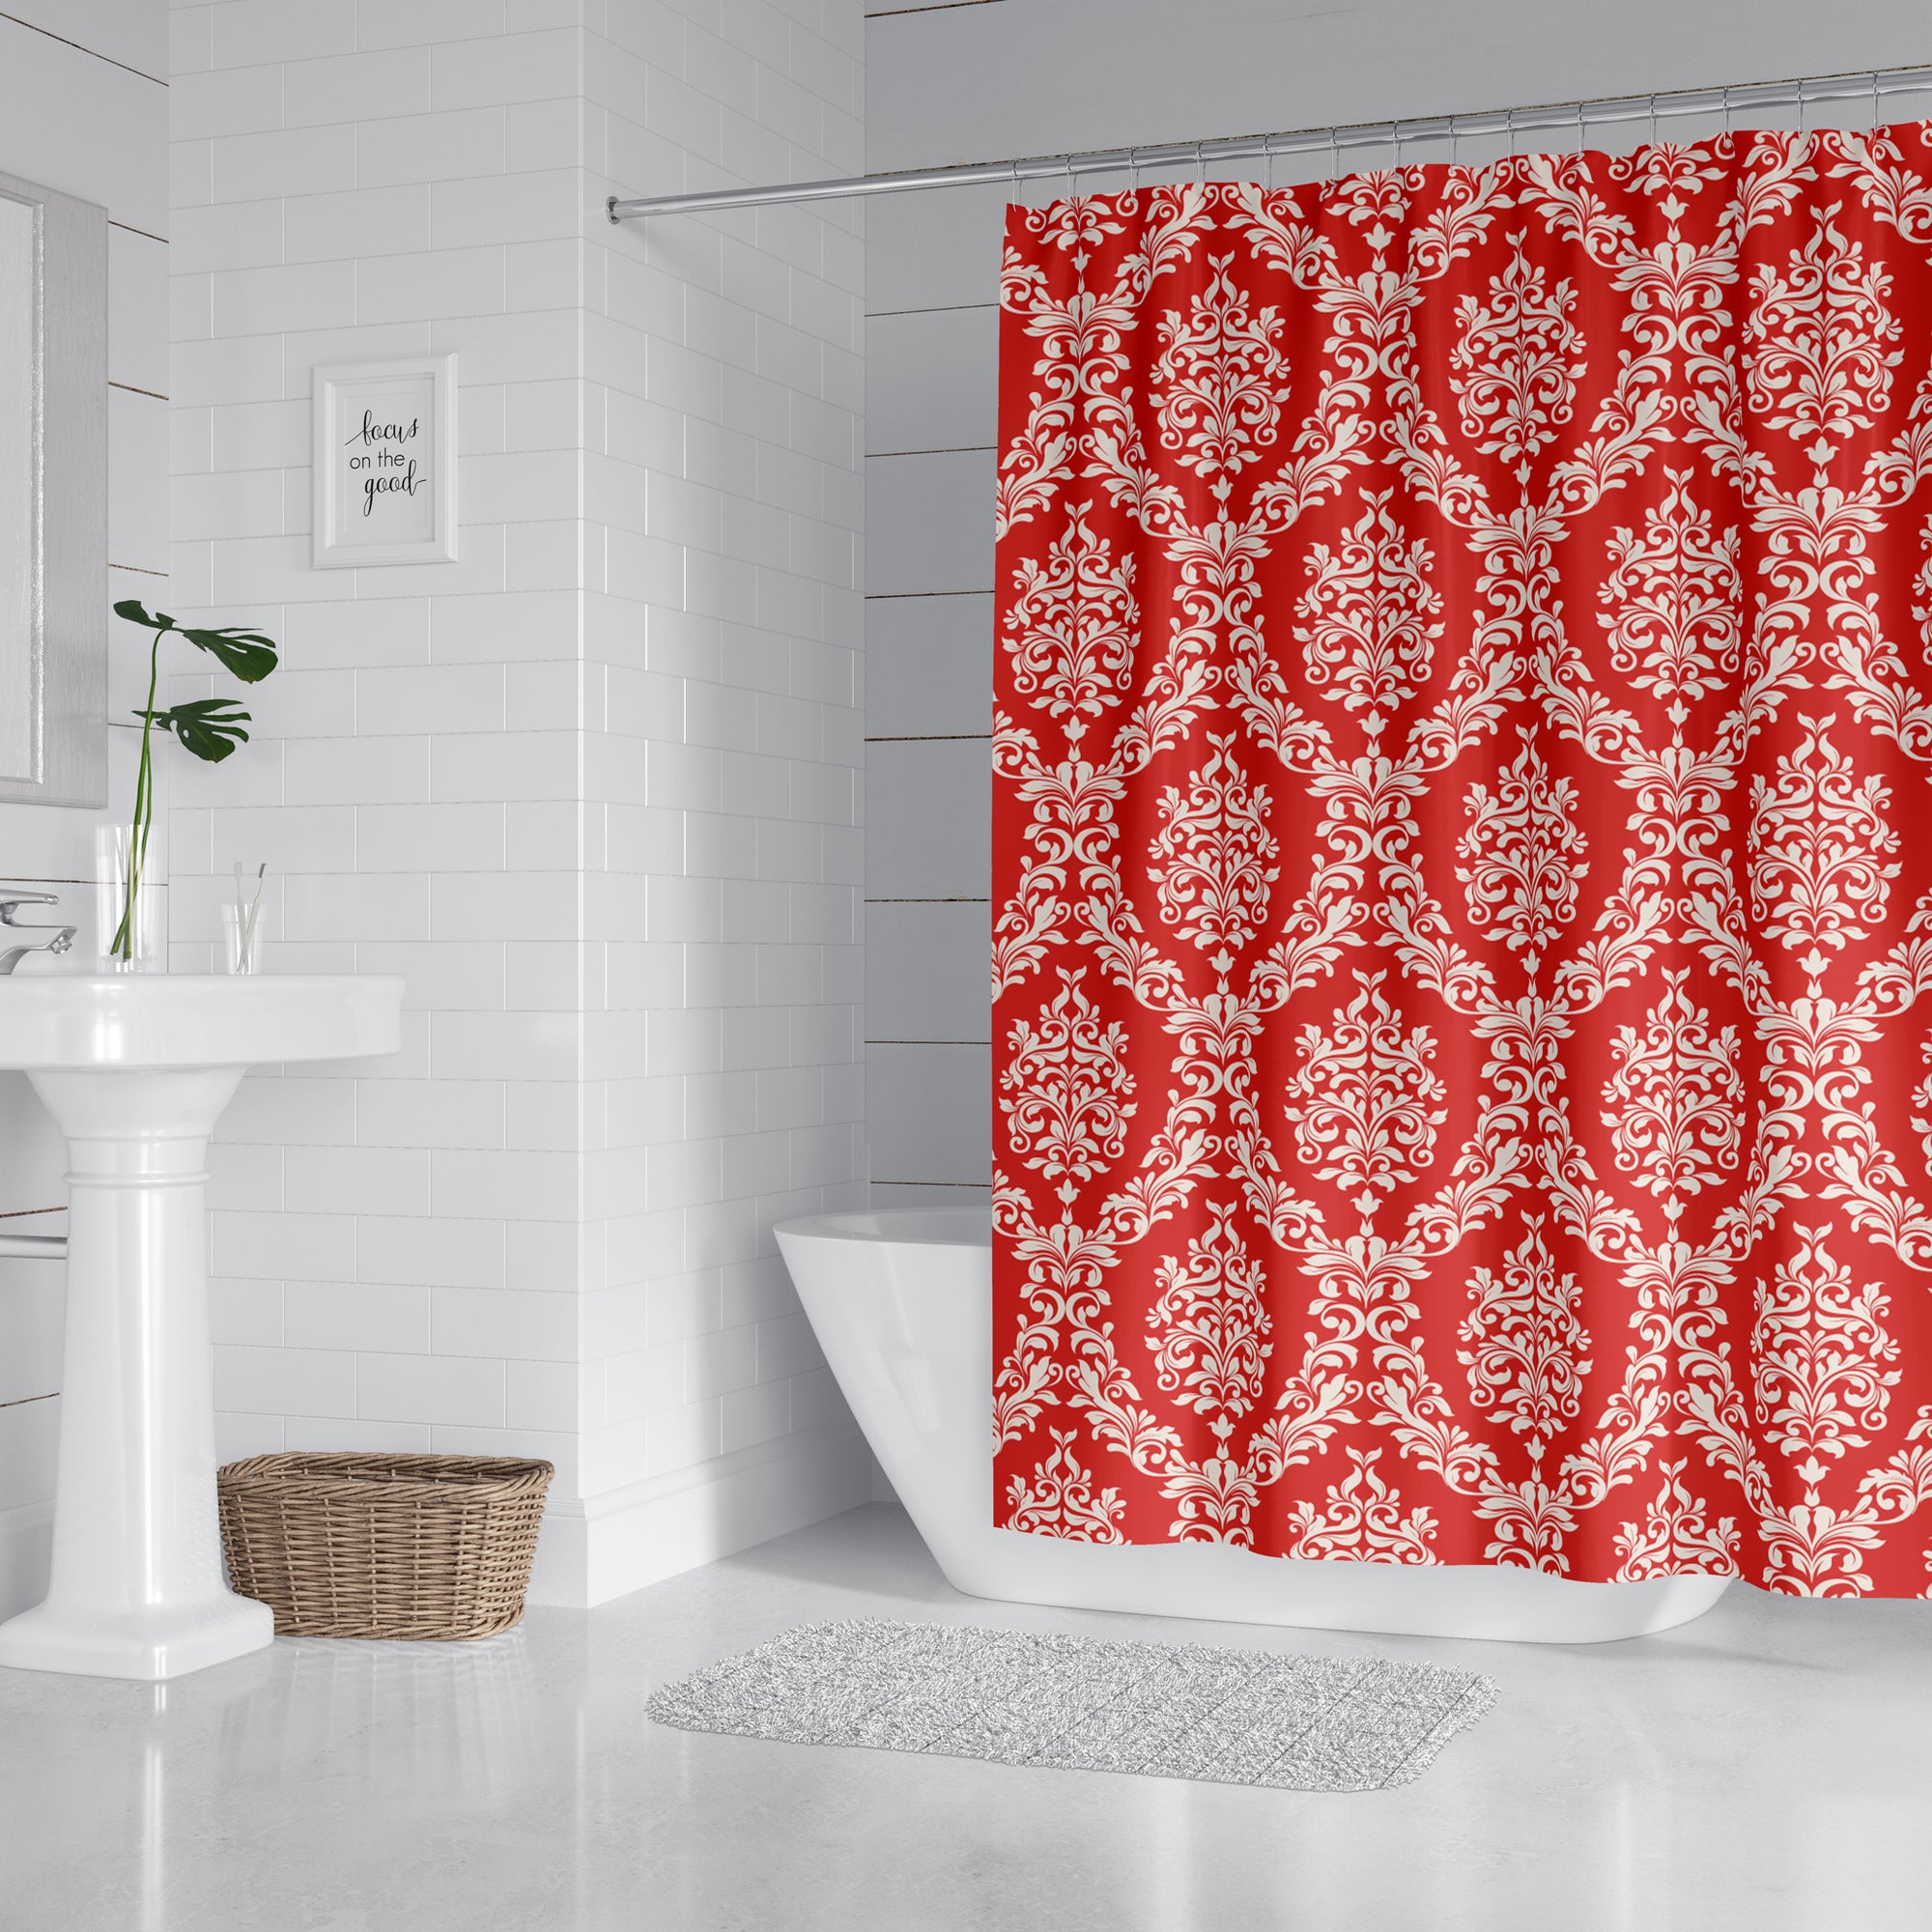 Valentines - Red and White Damask Shower Curtain